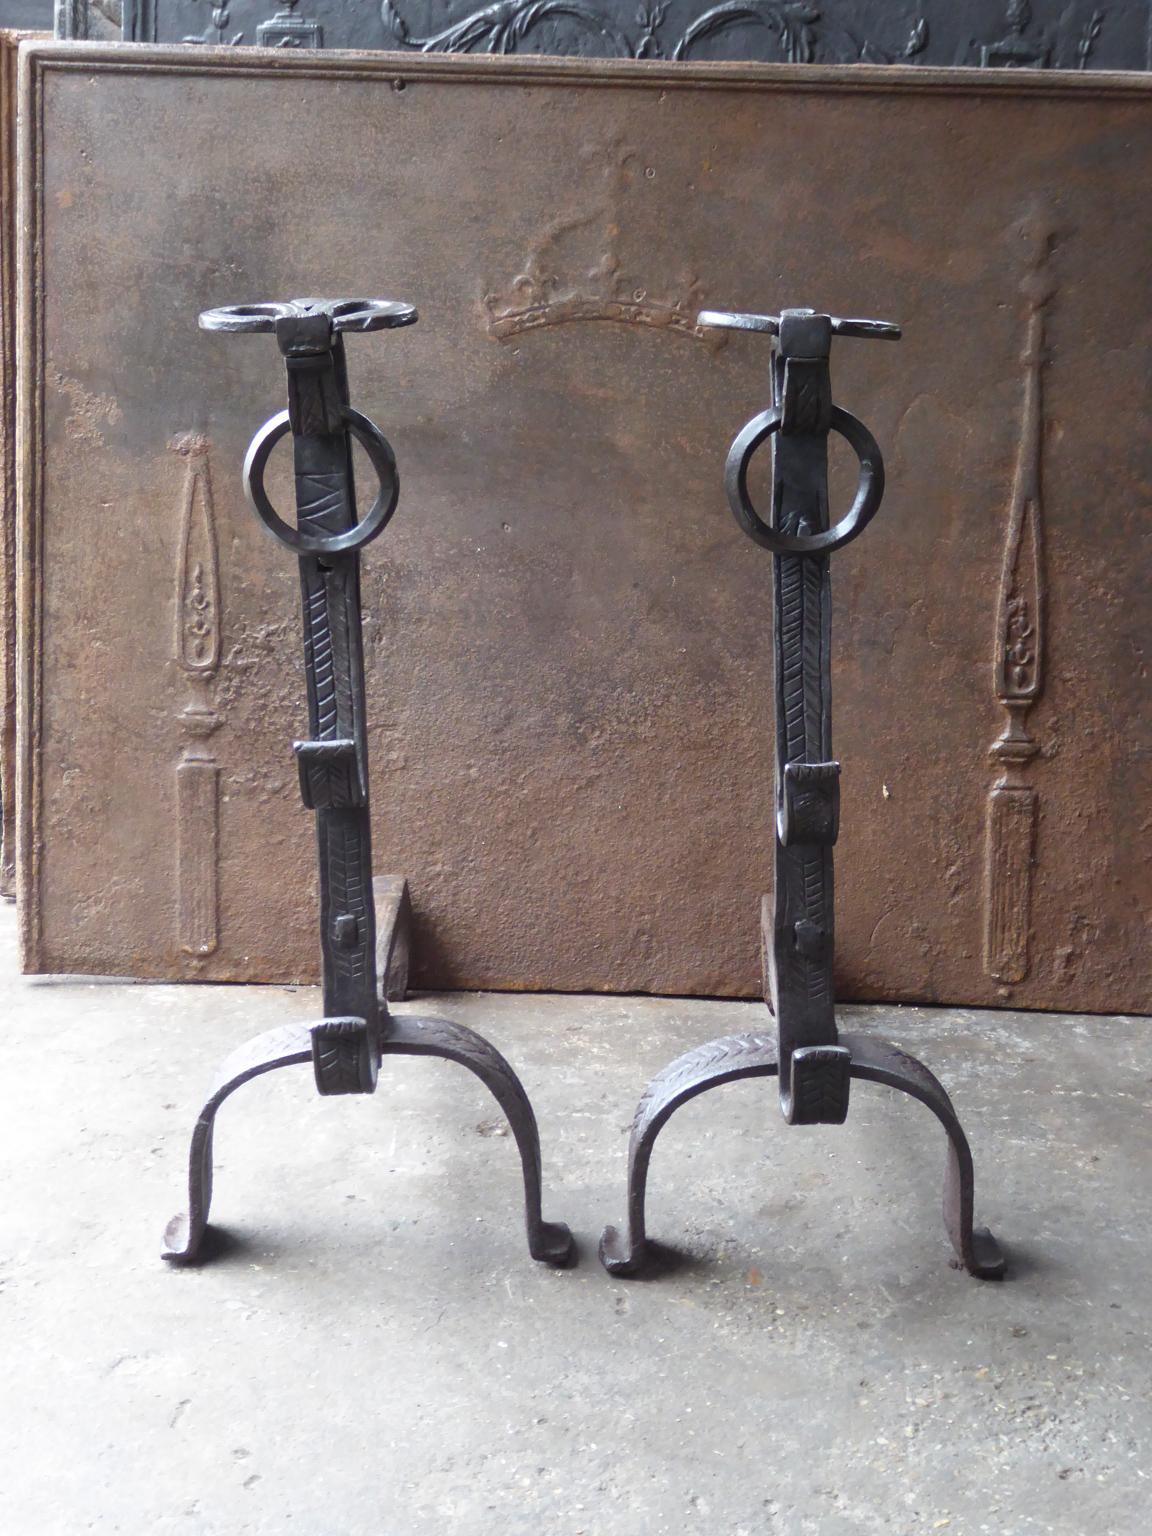 Beautiful 17th century French Louis XIV period andirons. They are hand forged and made of wrought iron. These French andirons are called 'landiers' in France. This dates from the times the andirons were the main cooking equipment in the house. They